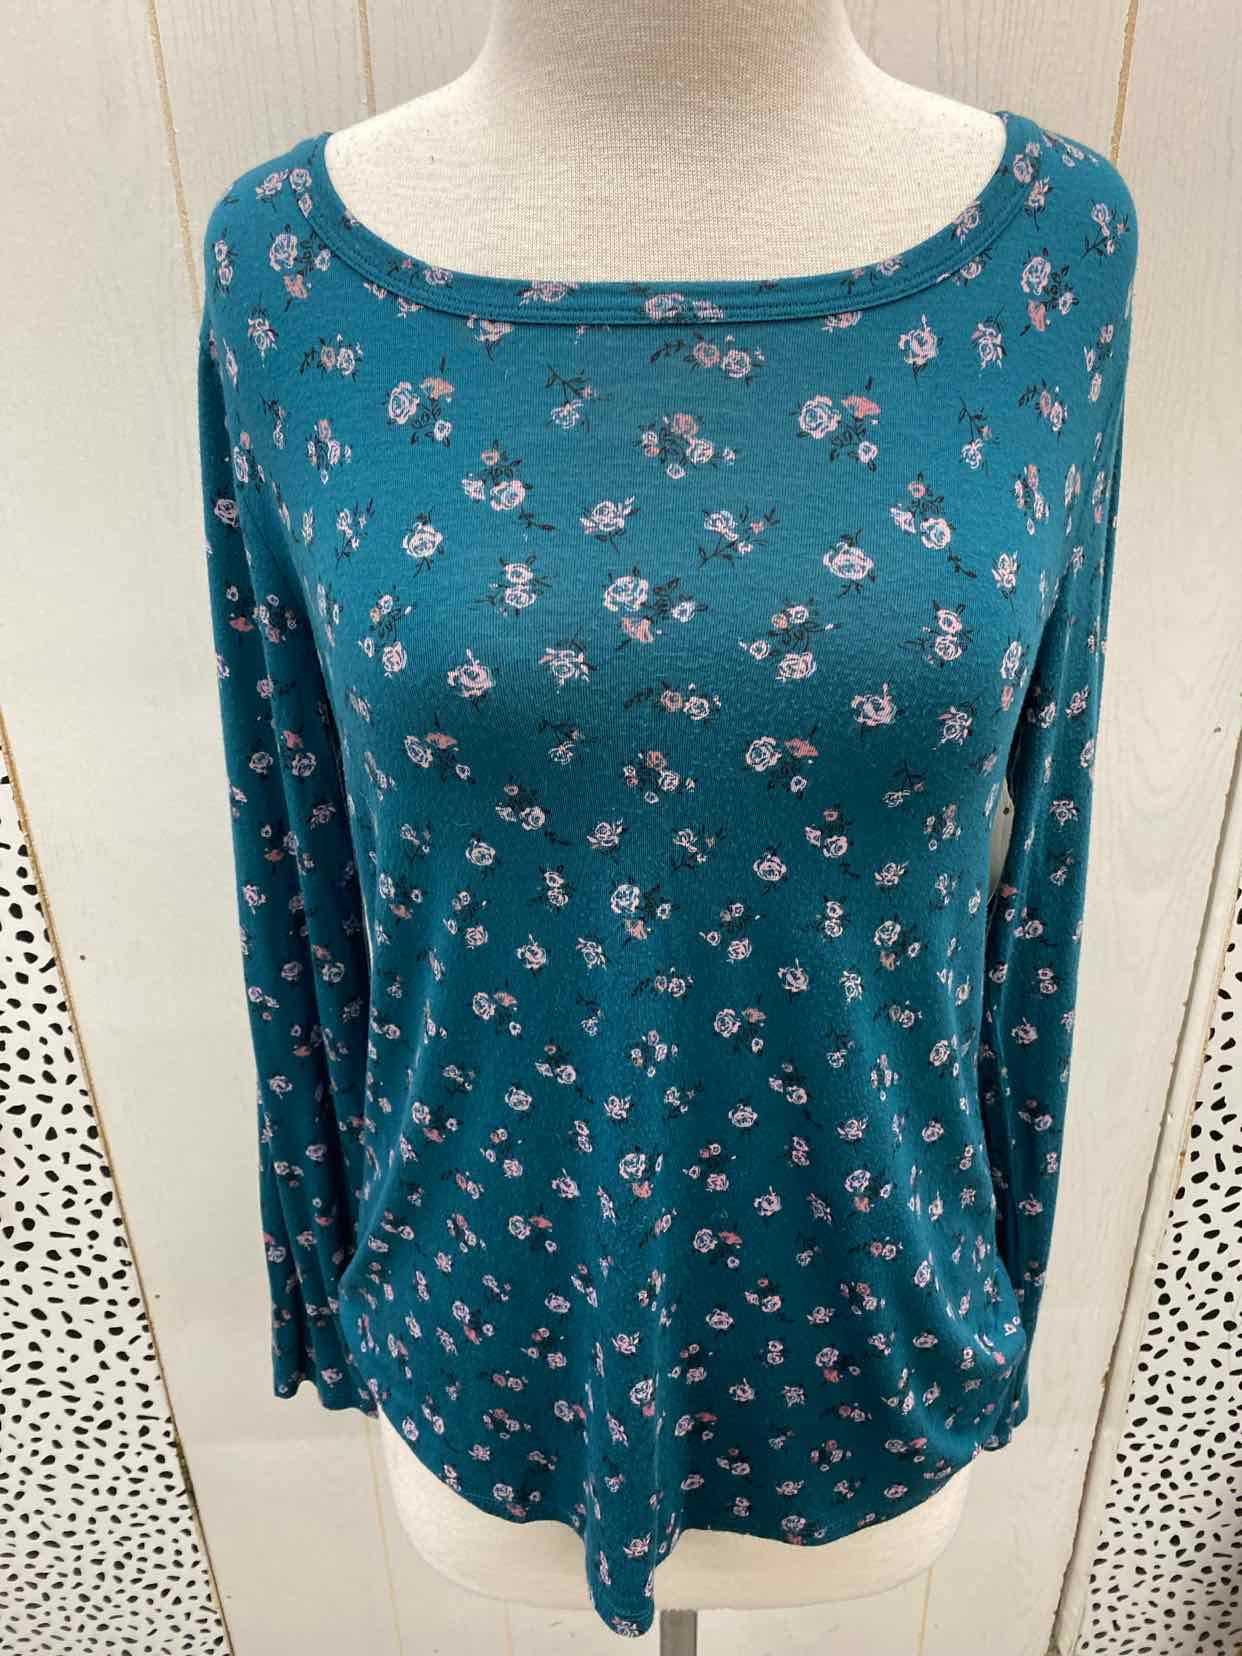 Maurices Teal Womens Size Small Shirt